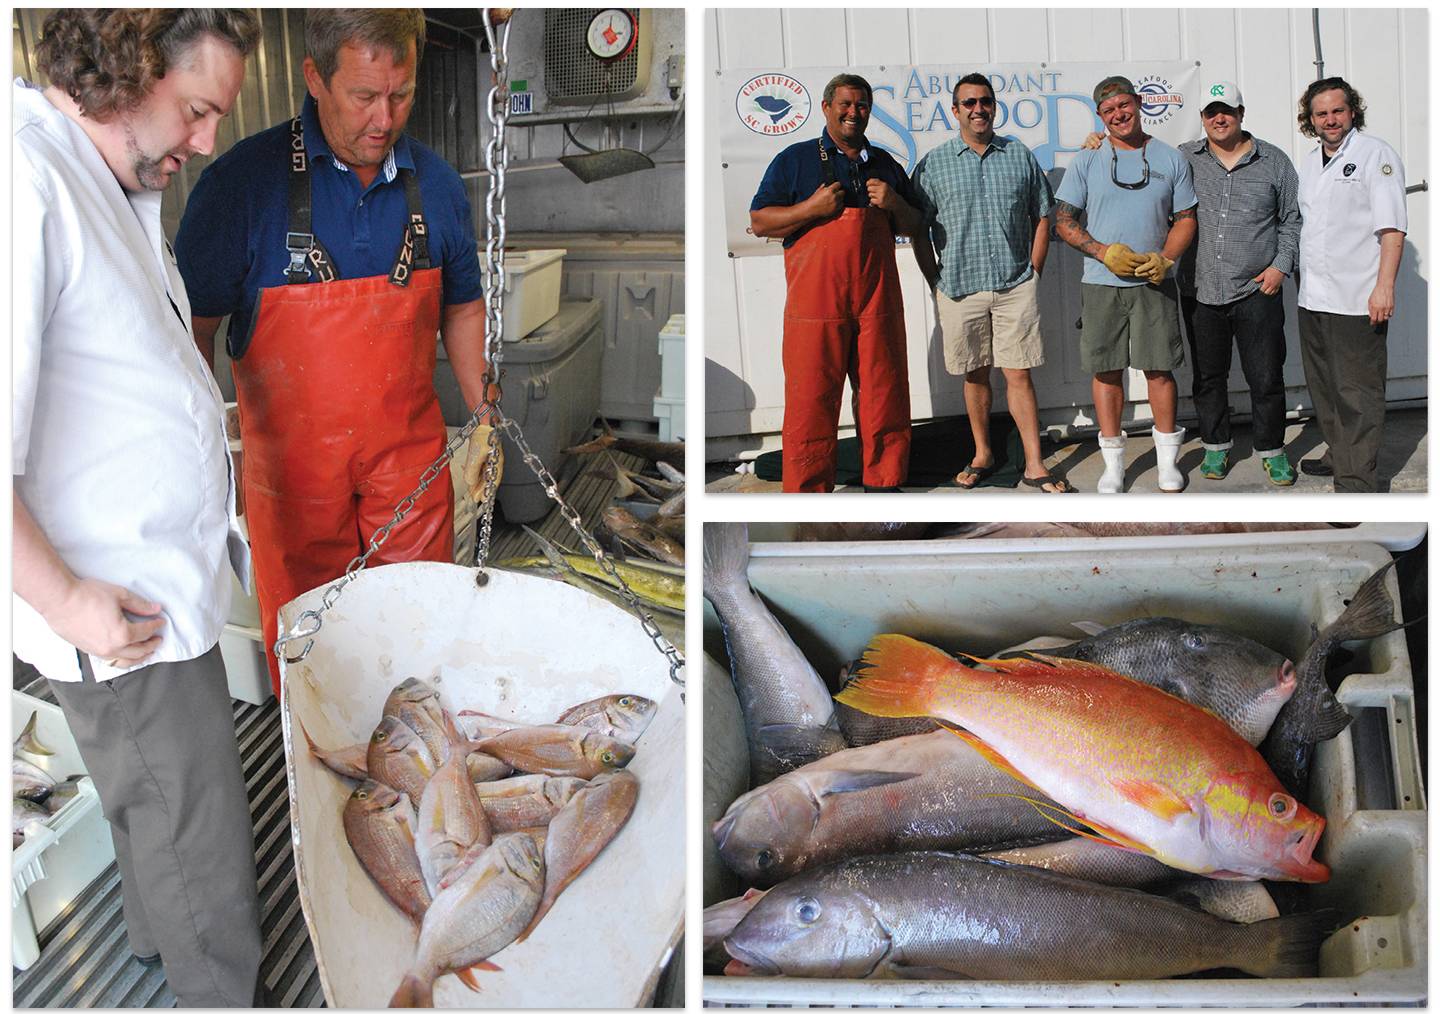 For about a decade, local chefs have vied for Mark’s diverse and sustainably caught seafood. (Left to right) NICO chef-owner Nico Romo eyes some red porgy; Mark with The Grocery chef-owner Kevin Johnson, private chef Aaron Swersky, FIG’s Jason Stanhope, and Romo